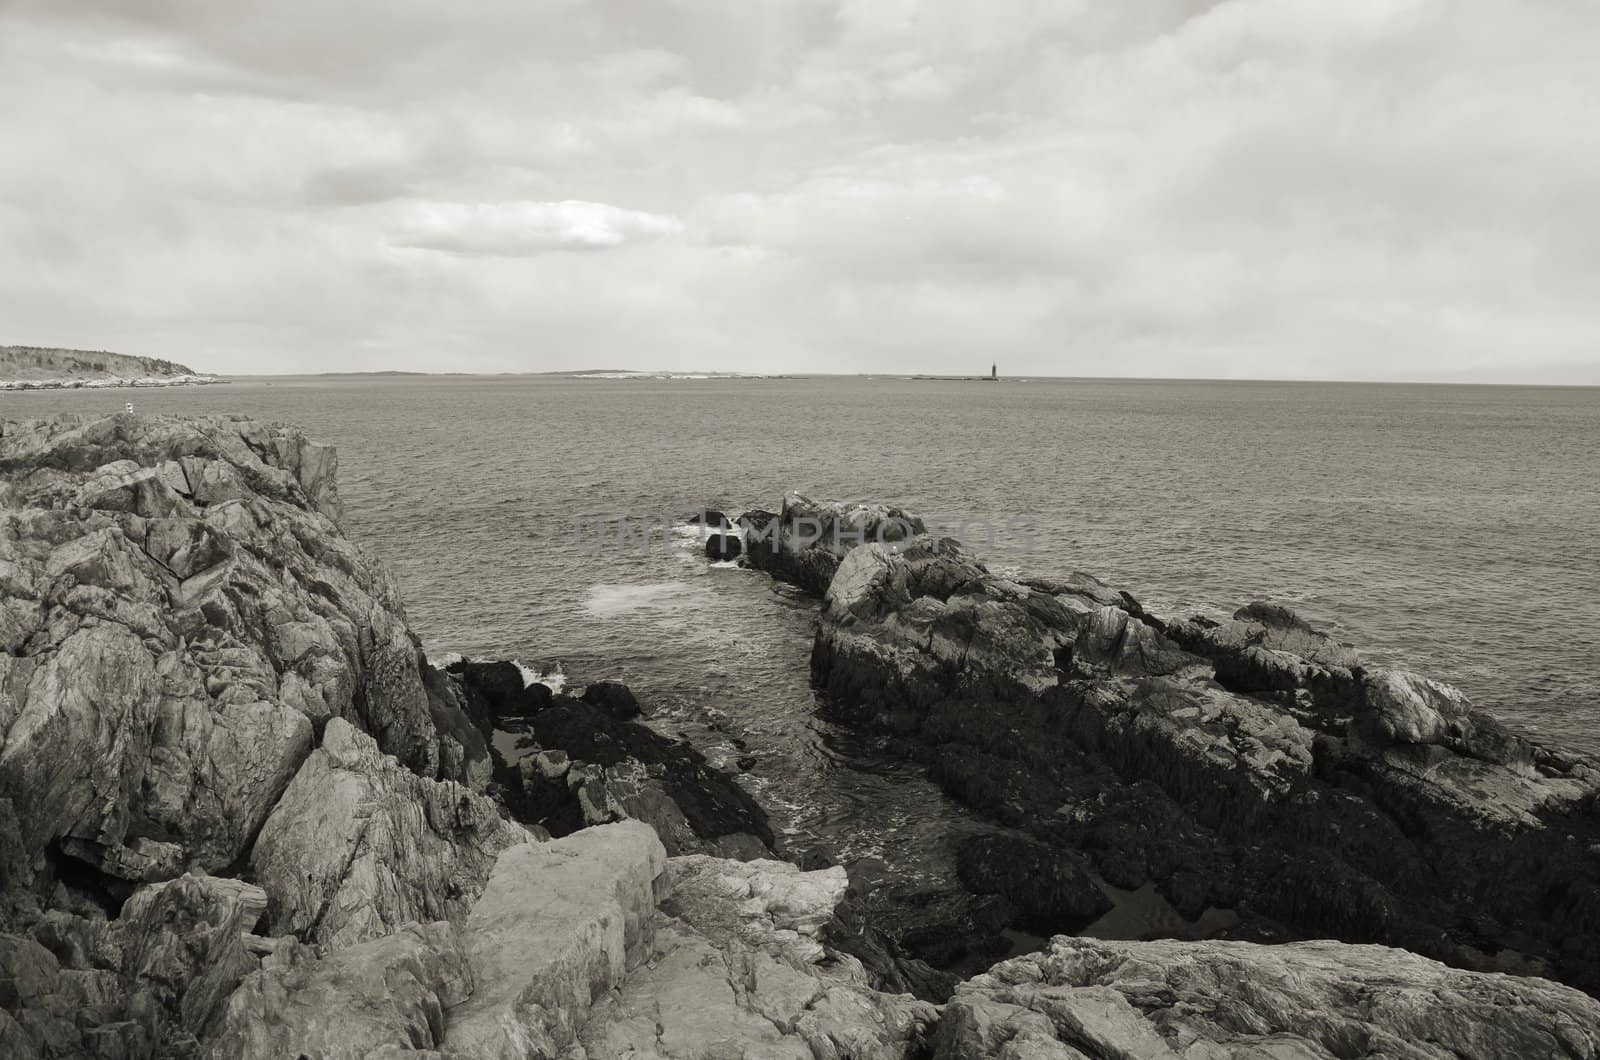 The rocky coast of maine shown in black and white